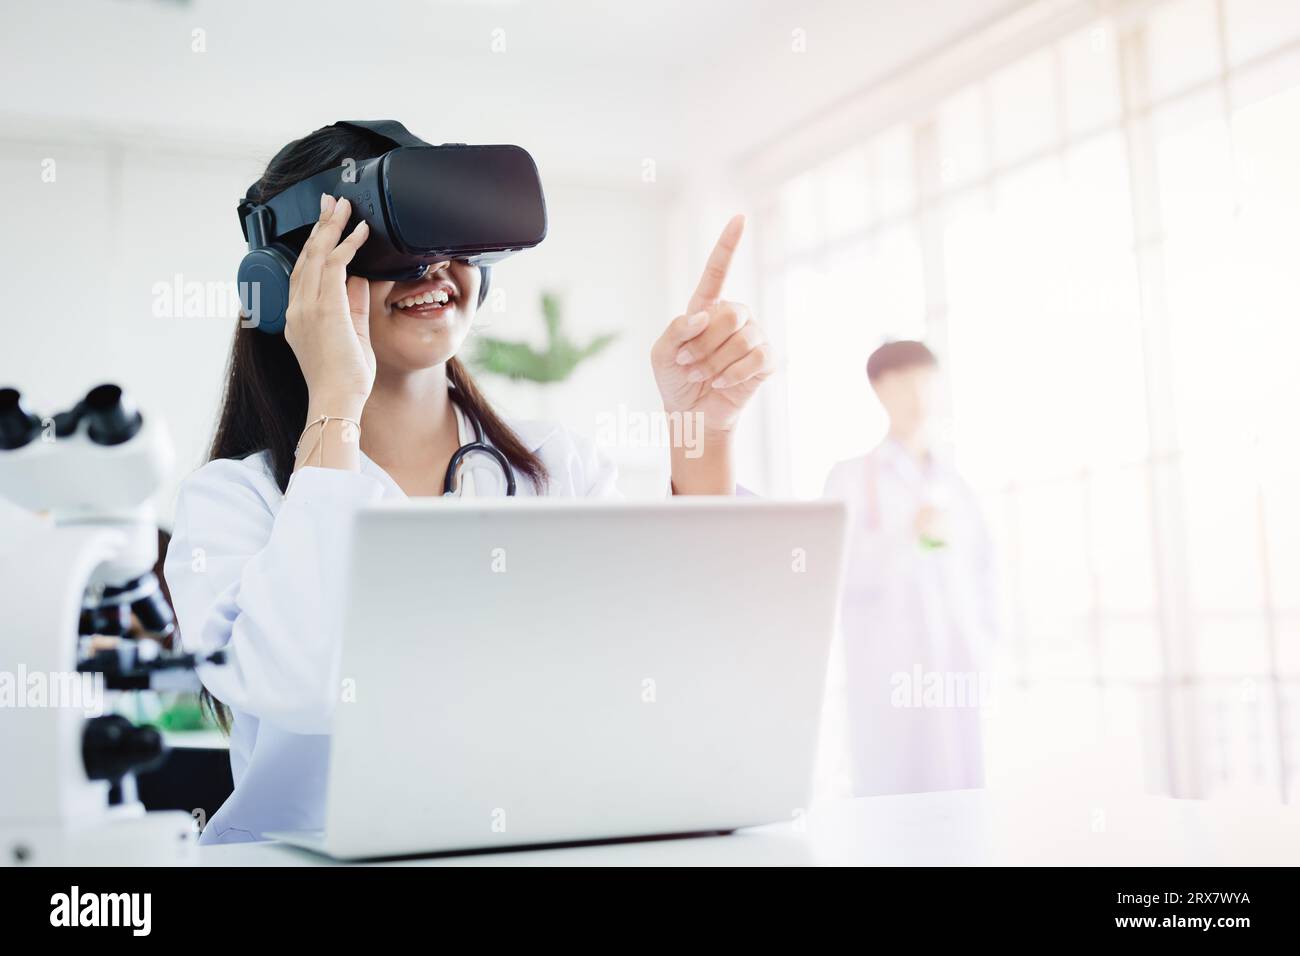 Student using VR glasses headset technology for help visual learning education science class room in modern school Stock Photo